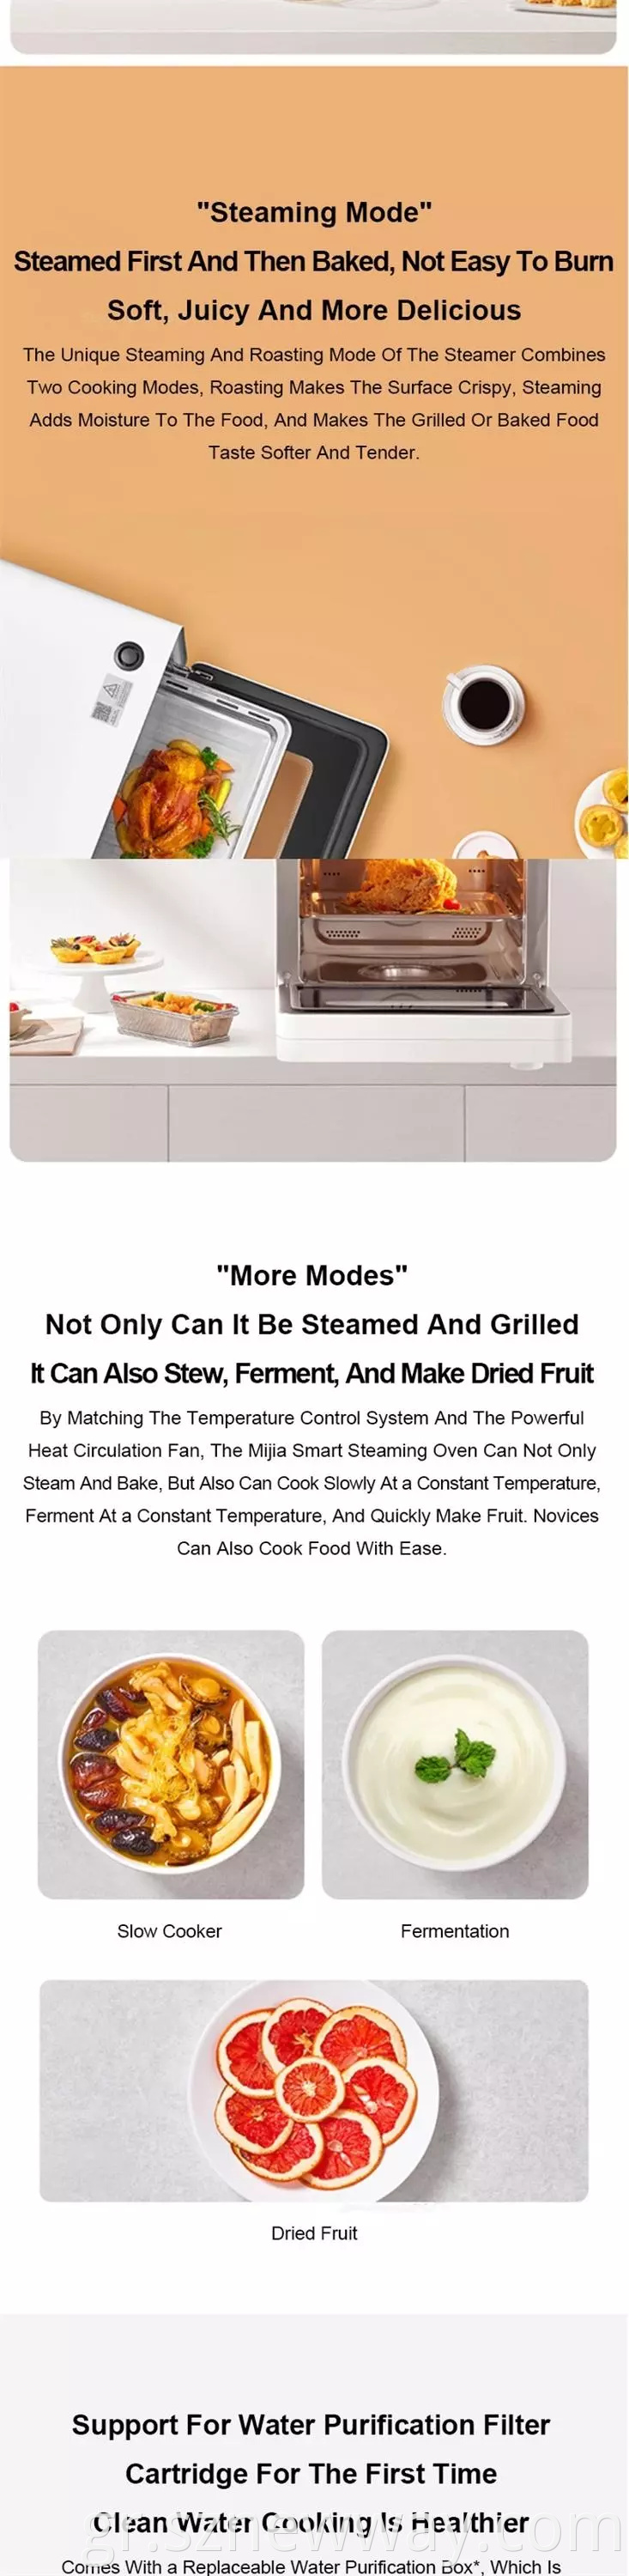 Mijia Microwave Steam Oven